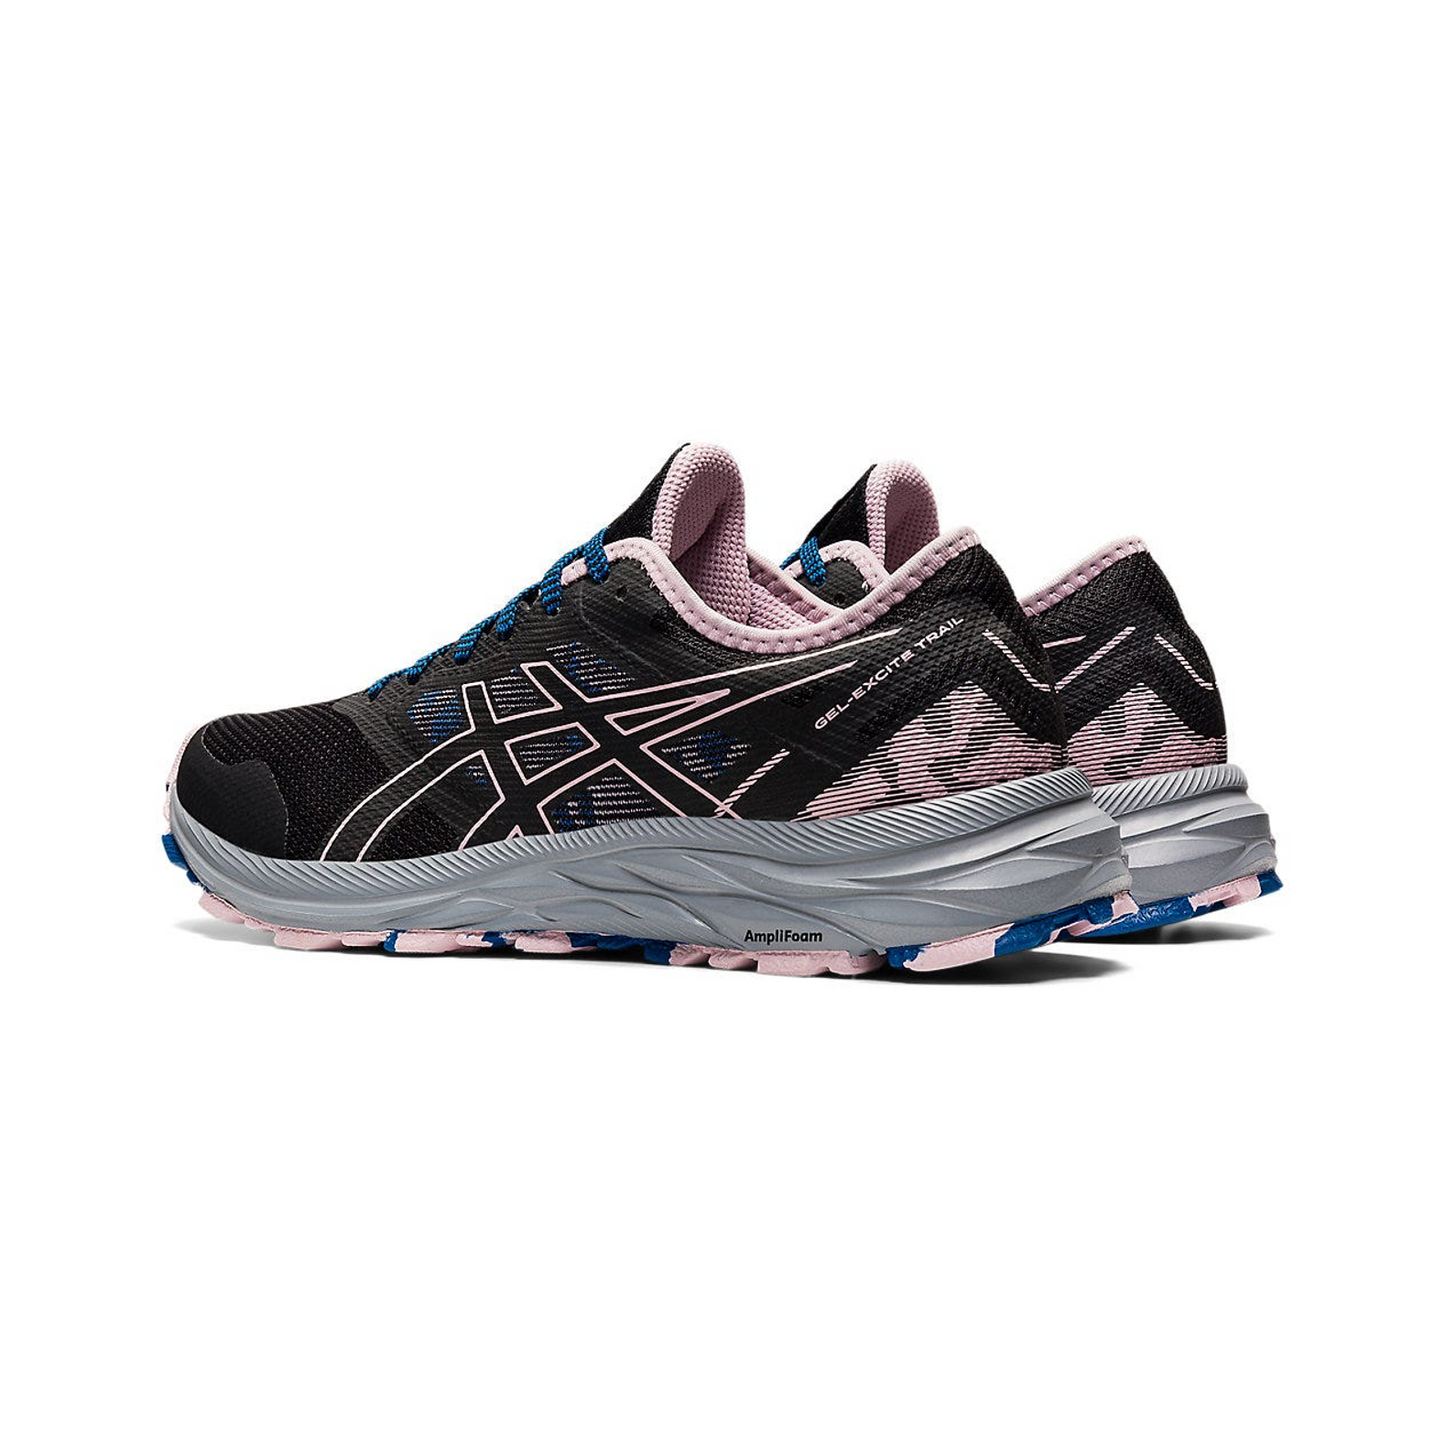 Women's Gel Excite Trail Black/Barely Rose